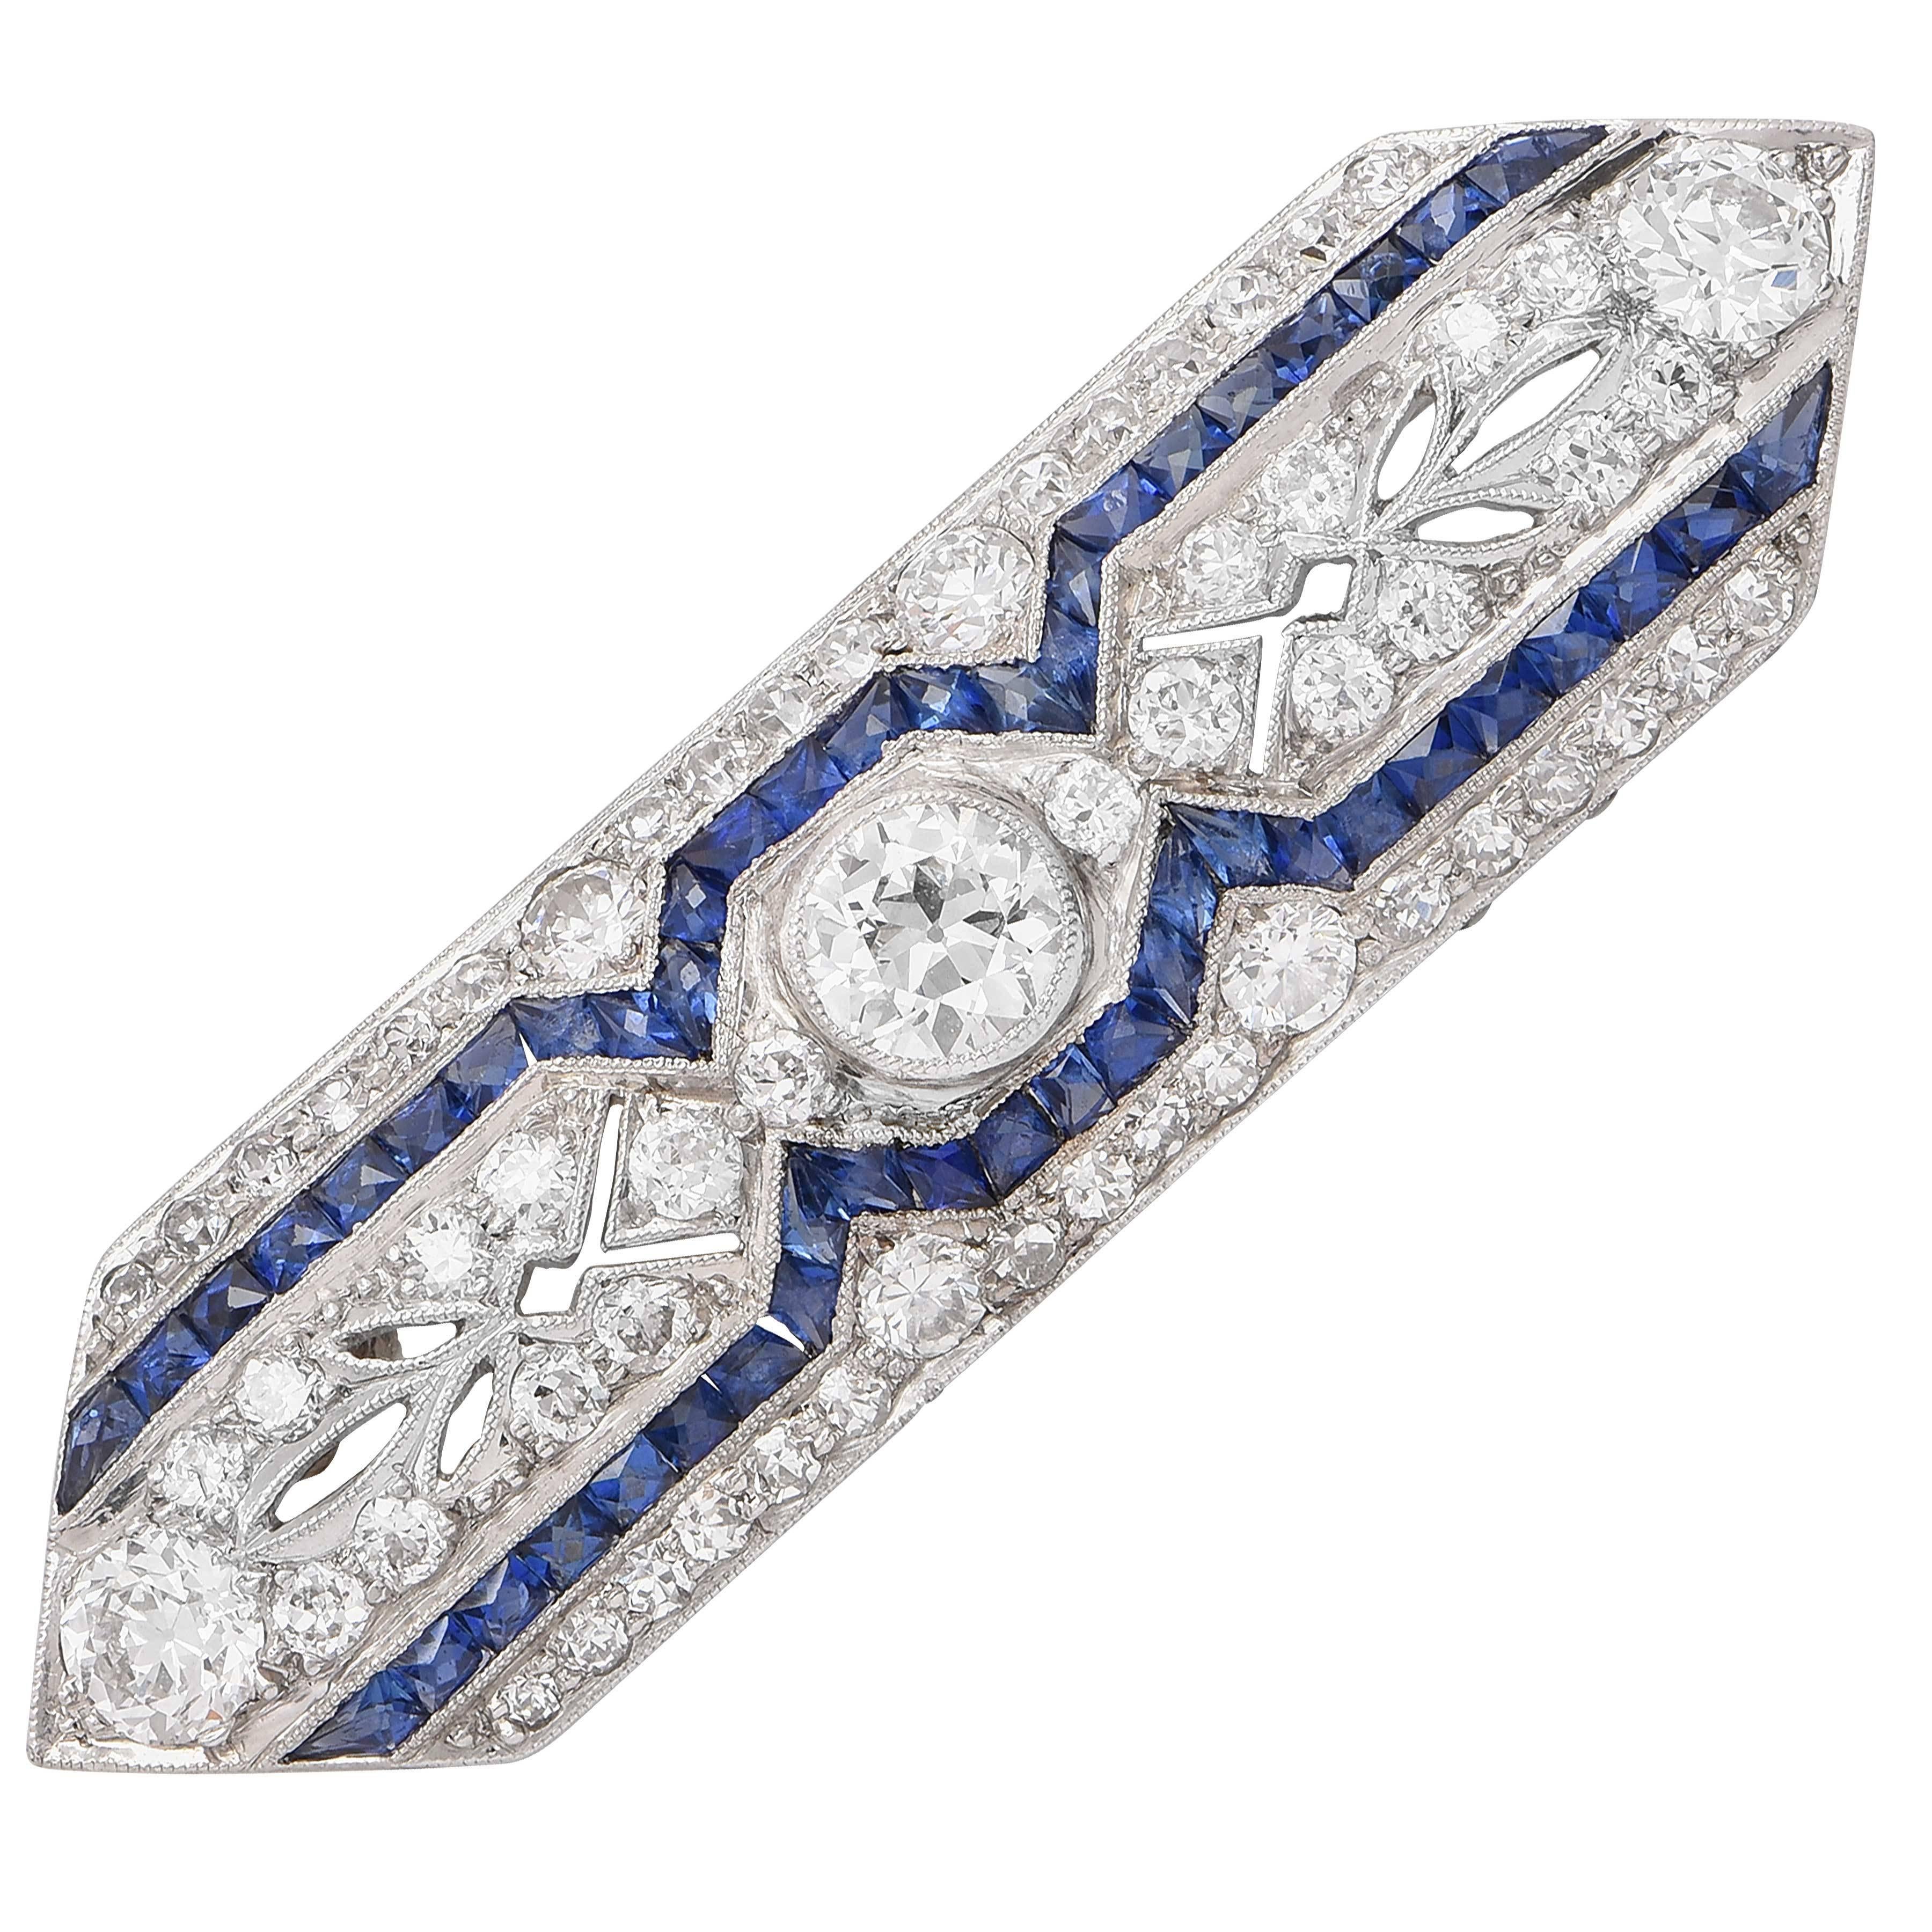 Art deco platinum, sapphire and diamond brooch bezel set with and old european cut diamond and set throughout with old european and old single cut diamonds with an with millegrain accents weighing approximately 2.10 carats and 2 rows of calibre-cut